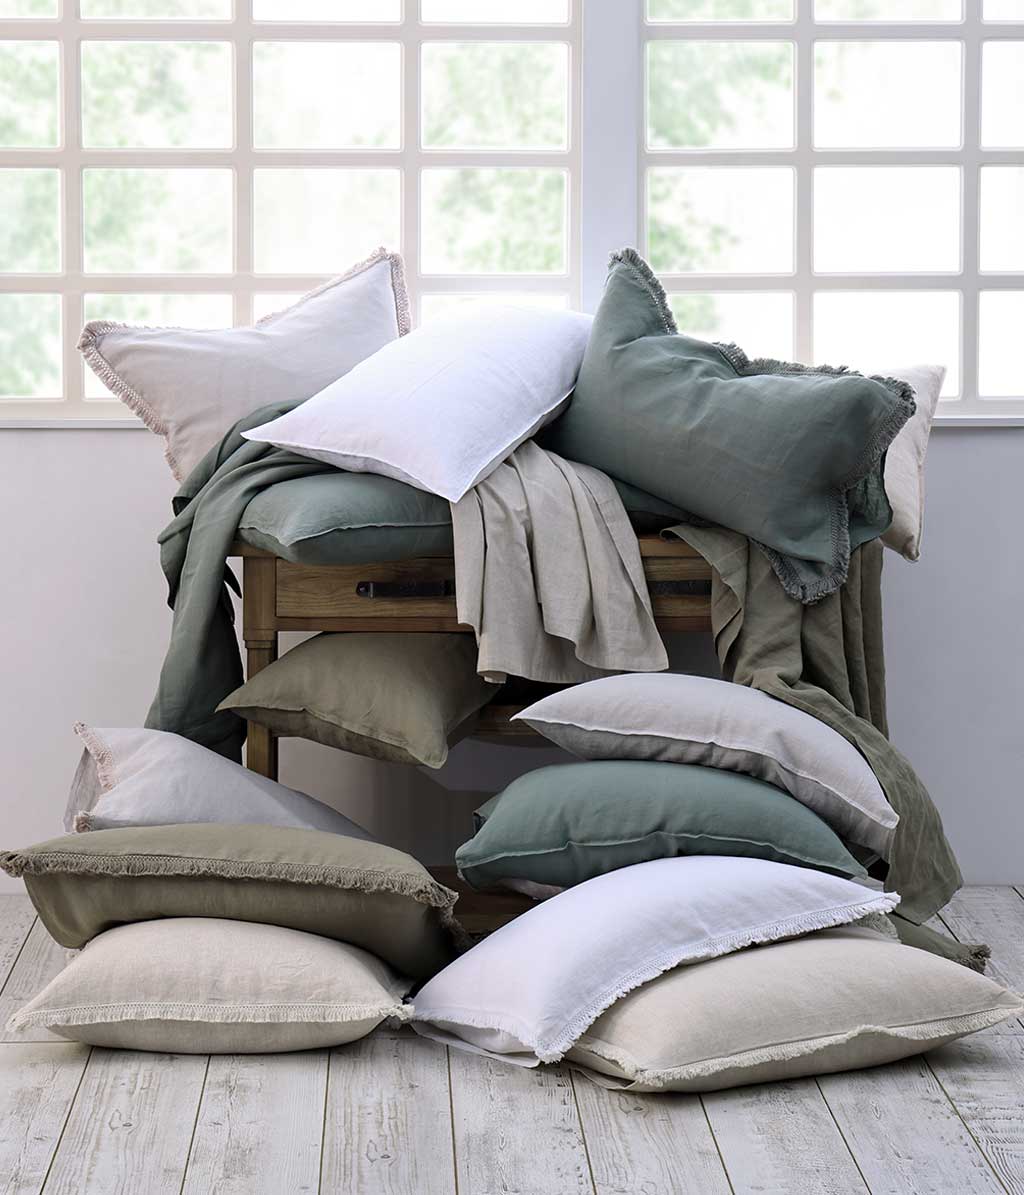 Laundered Linen Lodge Pillowcover Set Natural